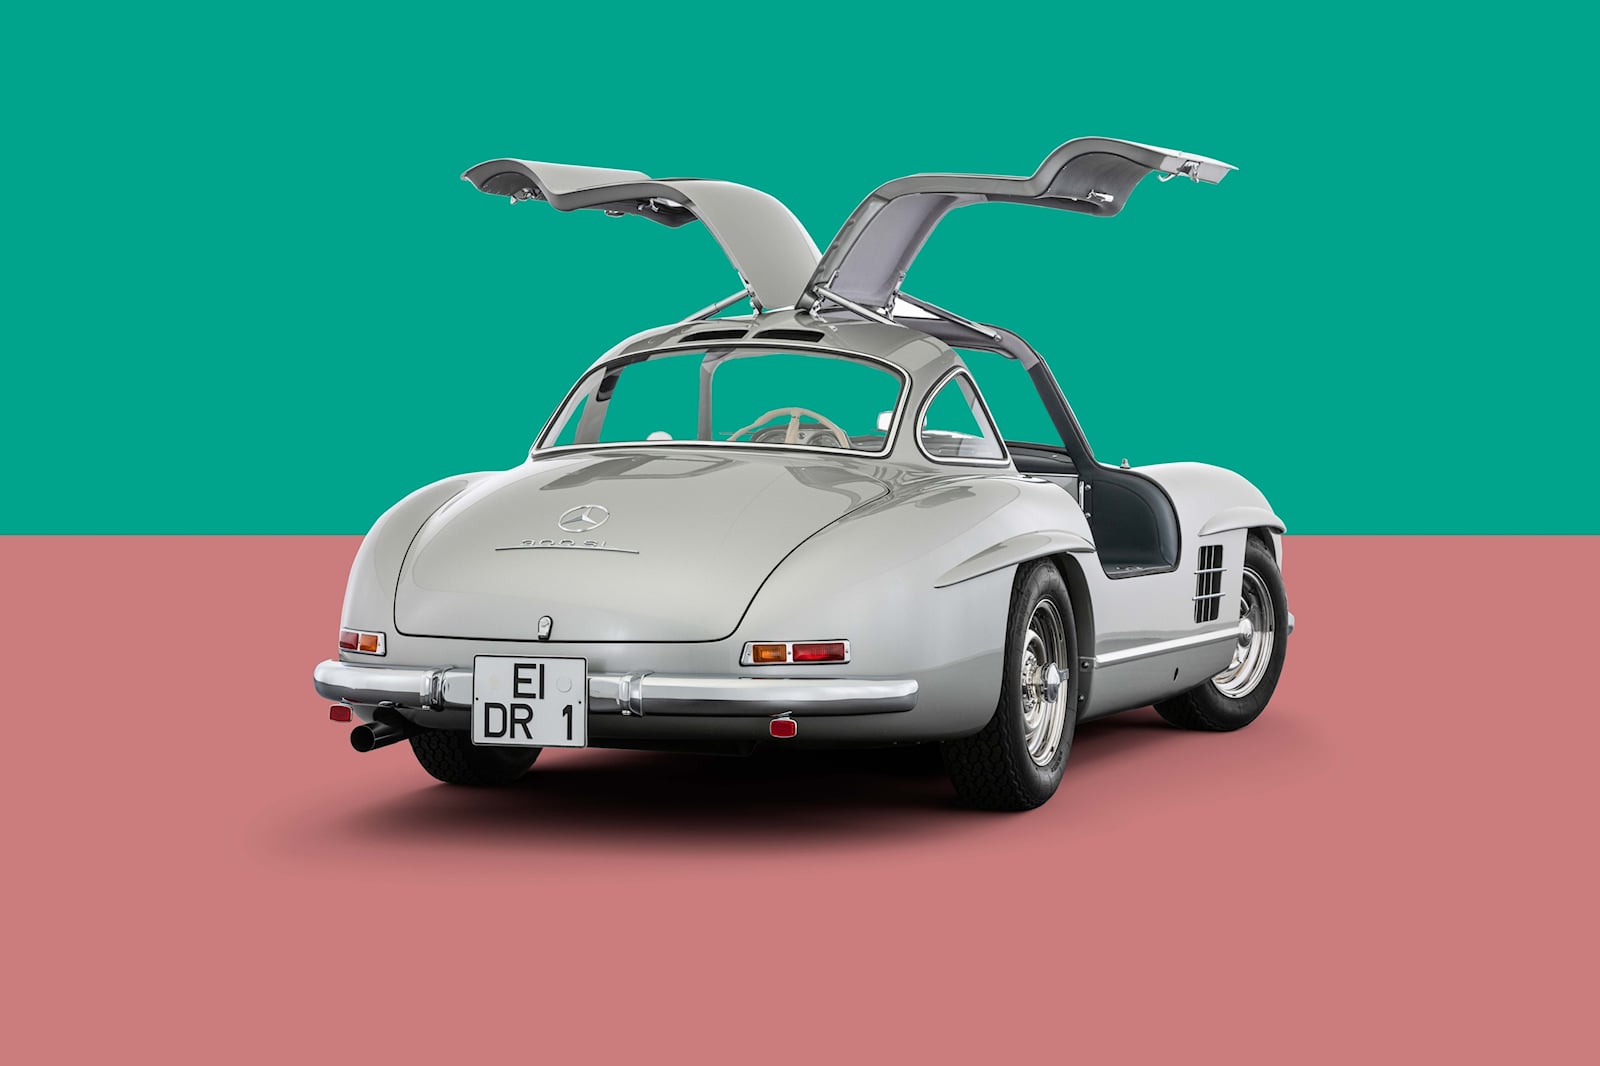 Andy Warhol Car Art Hits the Petersen Museum July 23rd